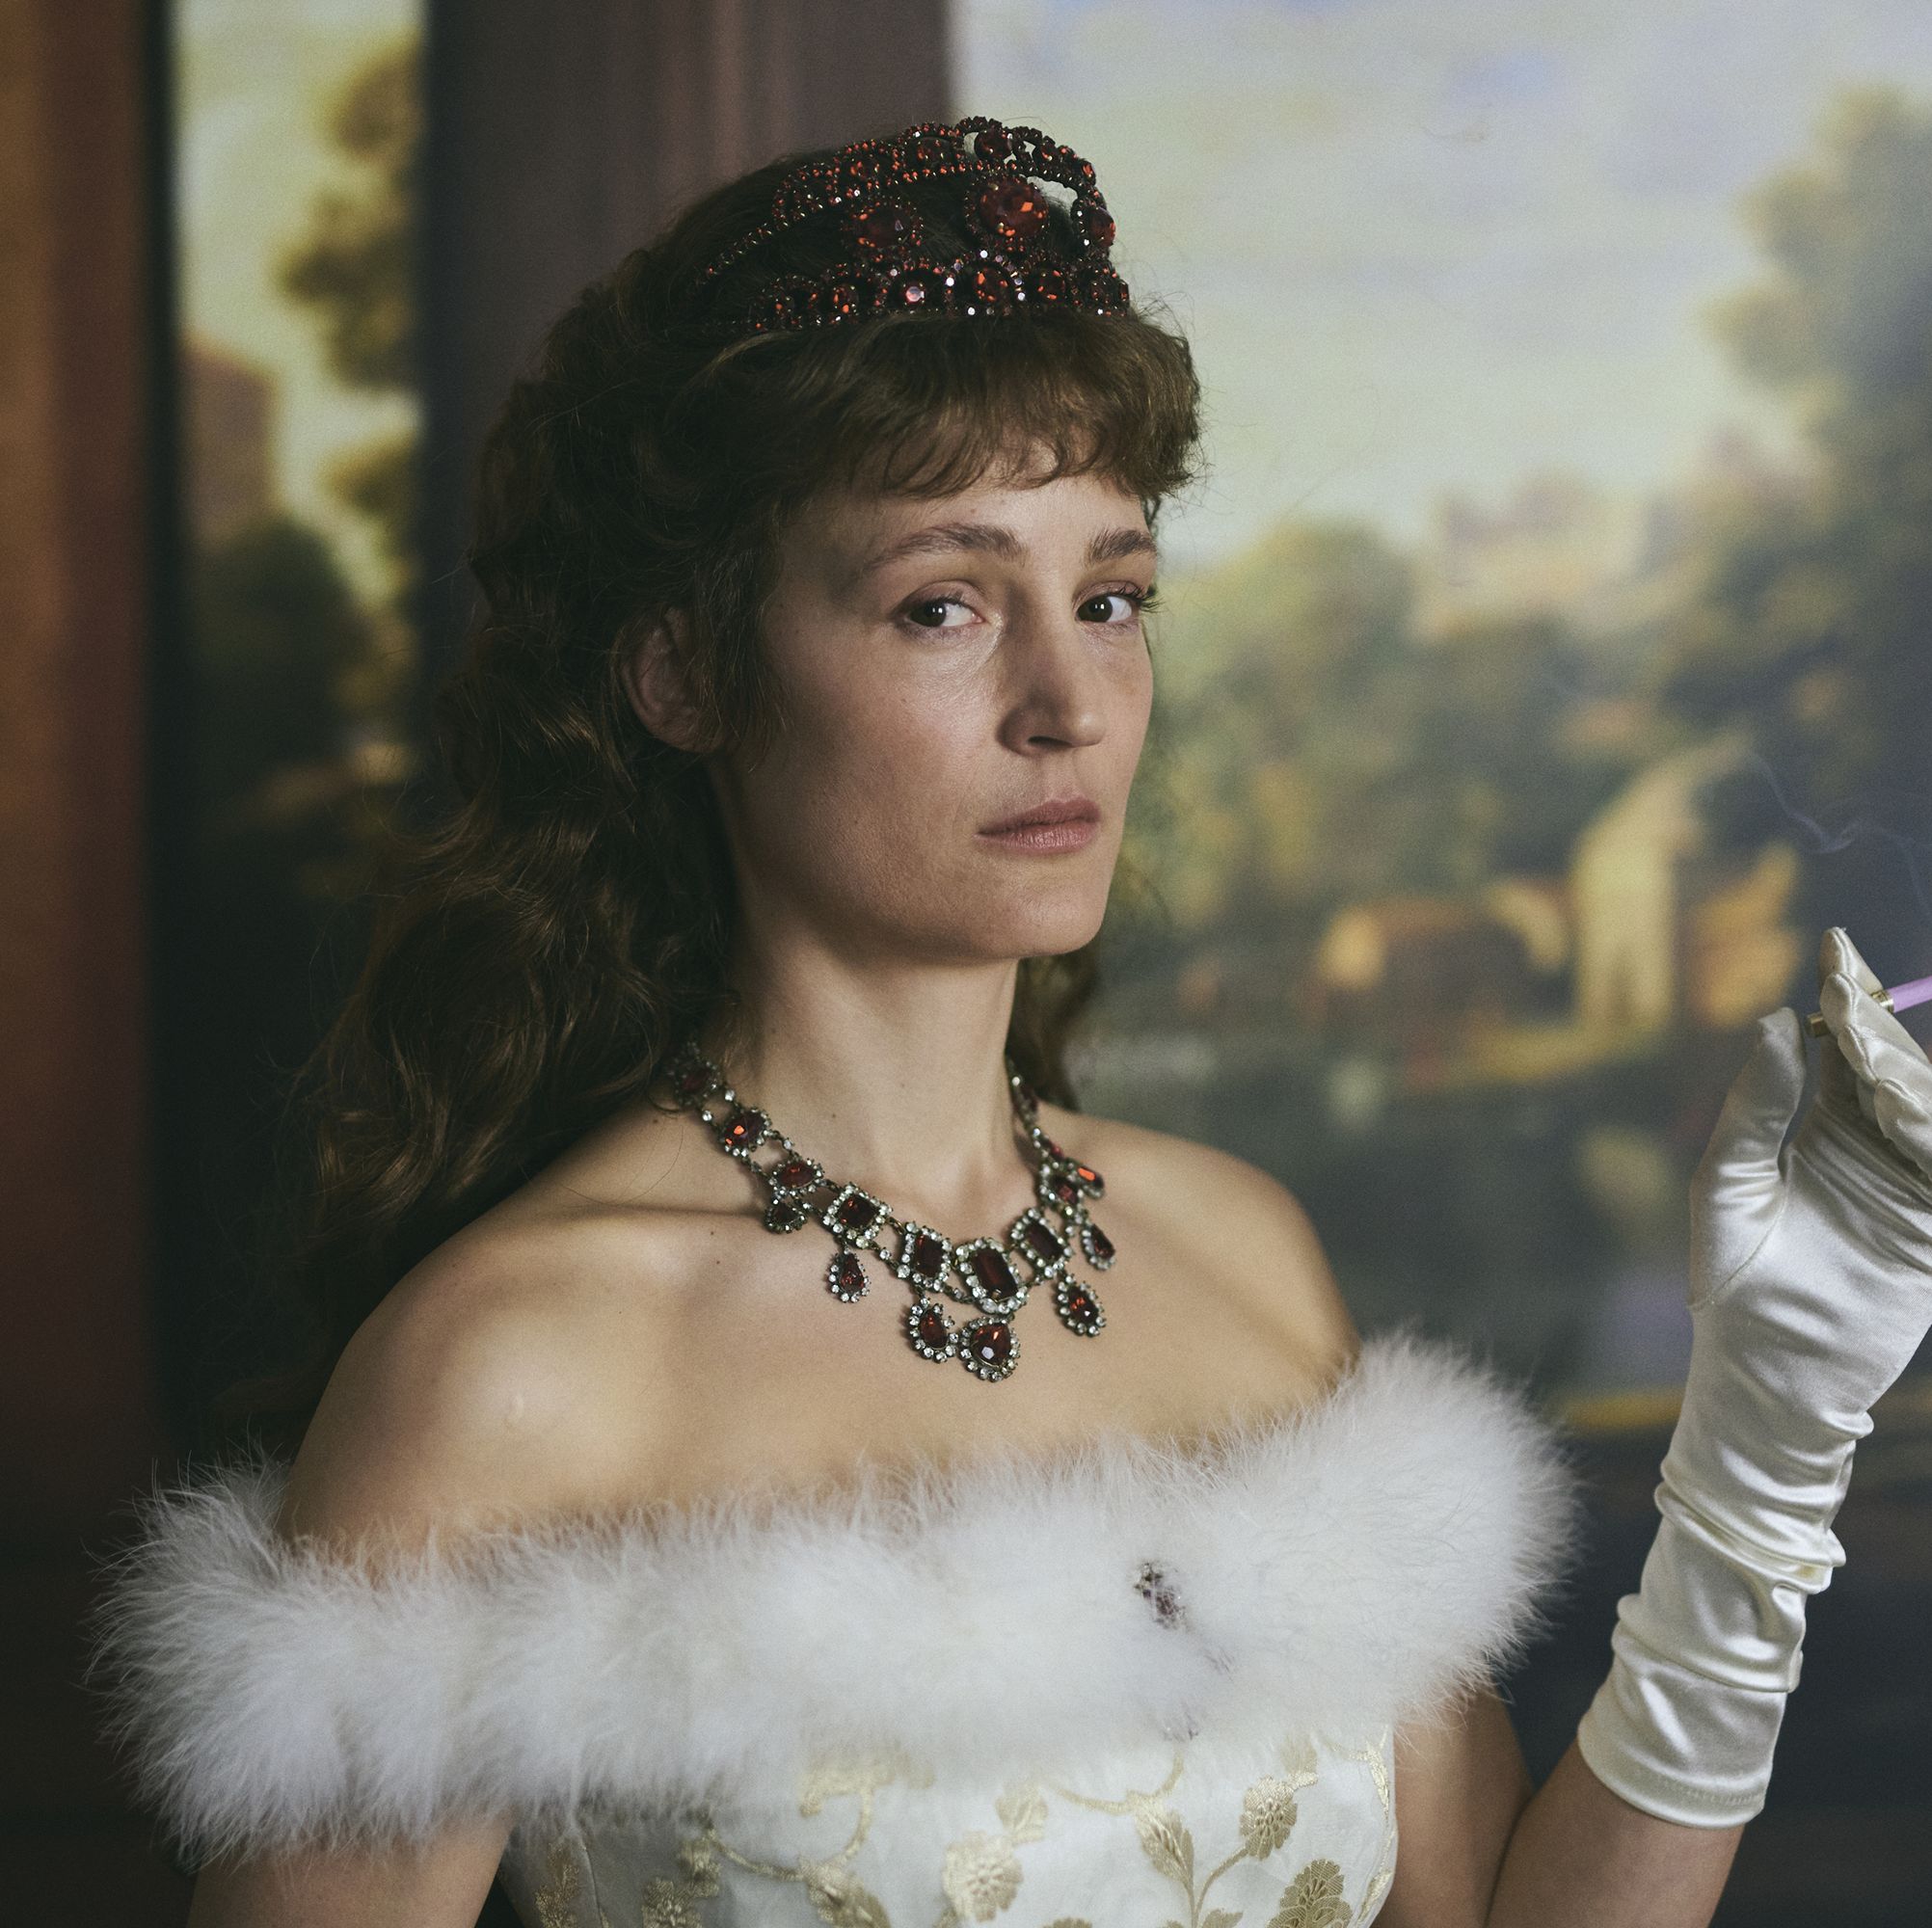 Marie Kreutzer's new film about the rebellious Empress Elisabeth of Austria has timely messages about women aging and defying the expectations thrust upon them. 